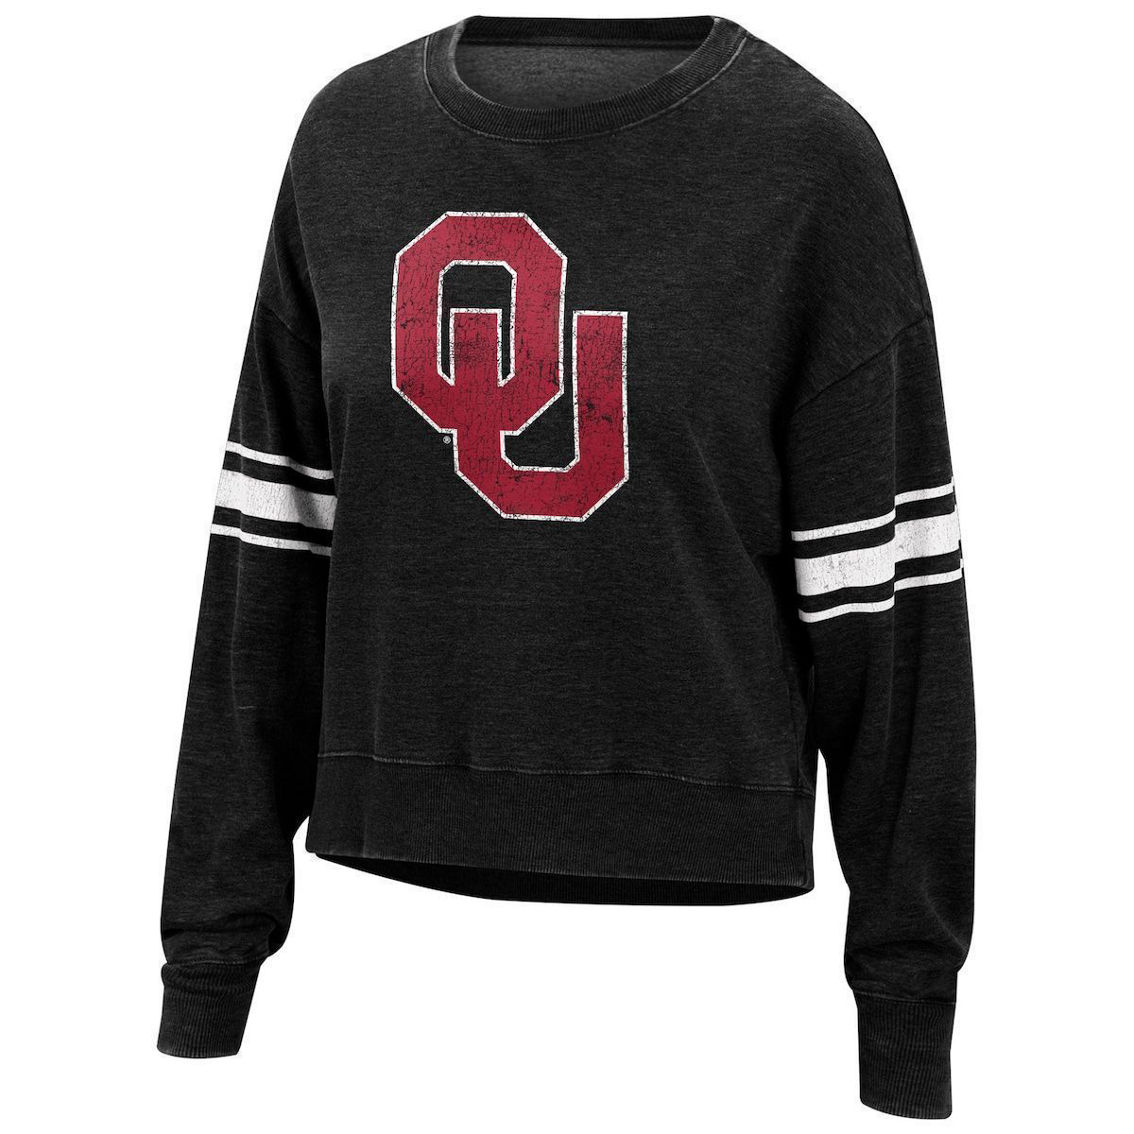 Top of the World Women's Black Oklahoma Sooners Camden Sleeve Stripe Washed Pullover Sweatshirt - Image 3 of 4